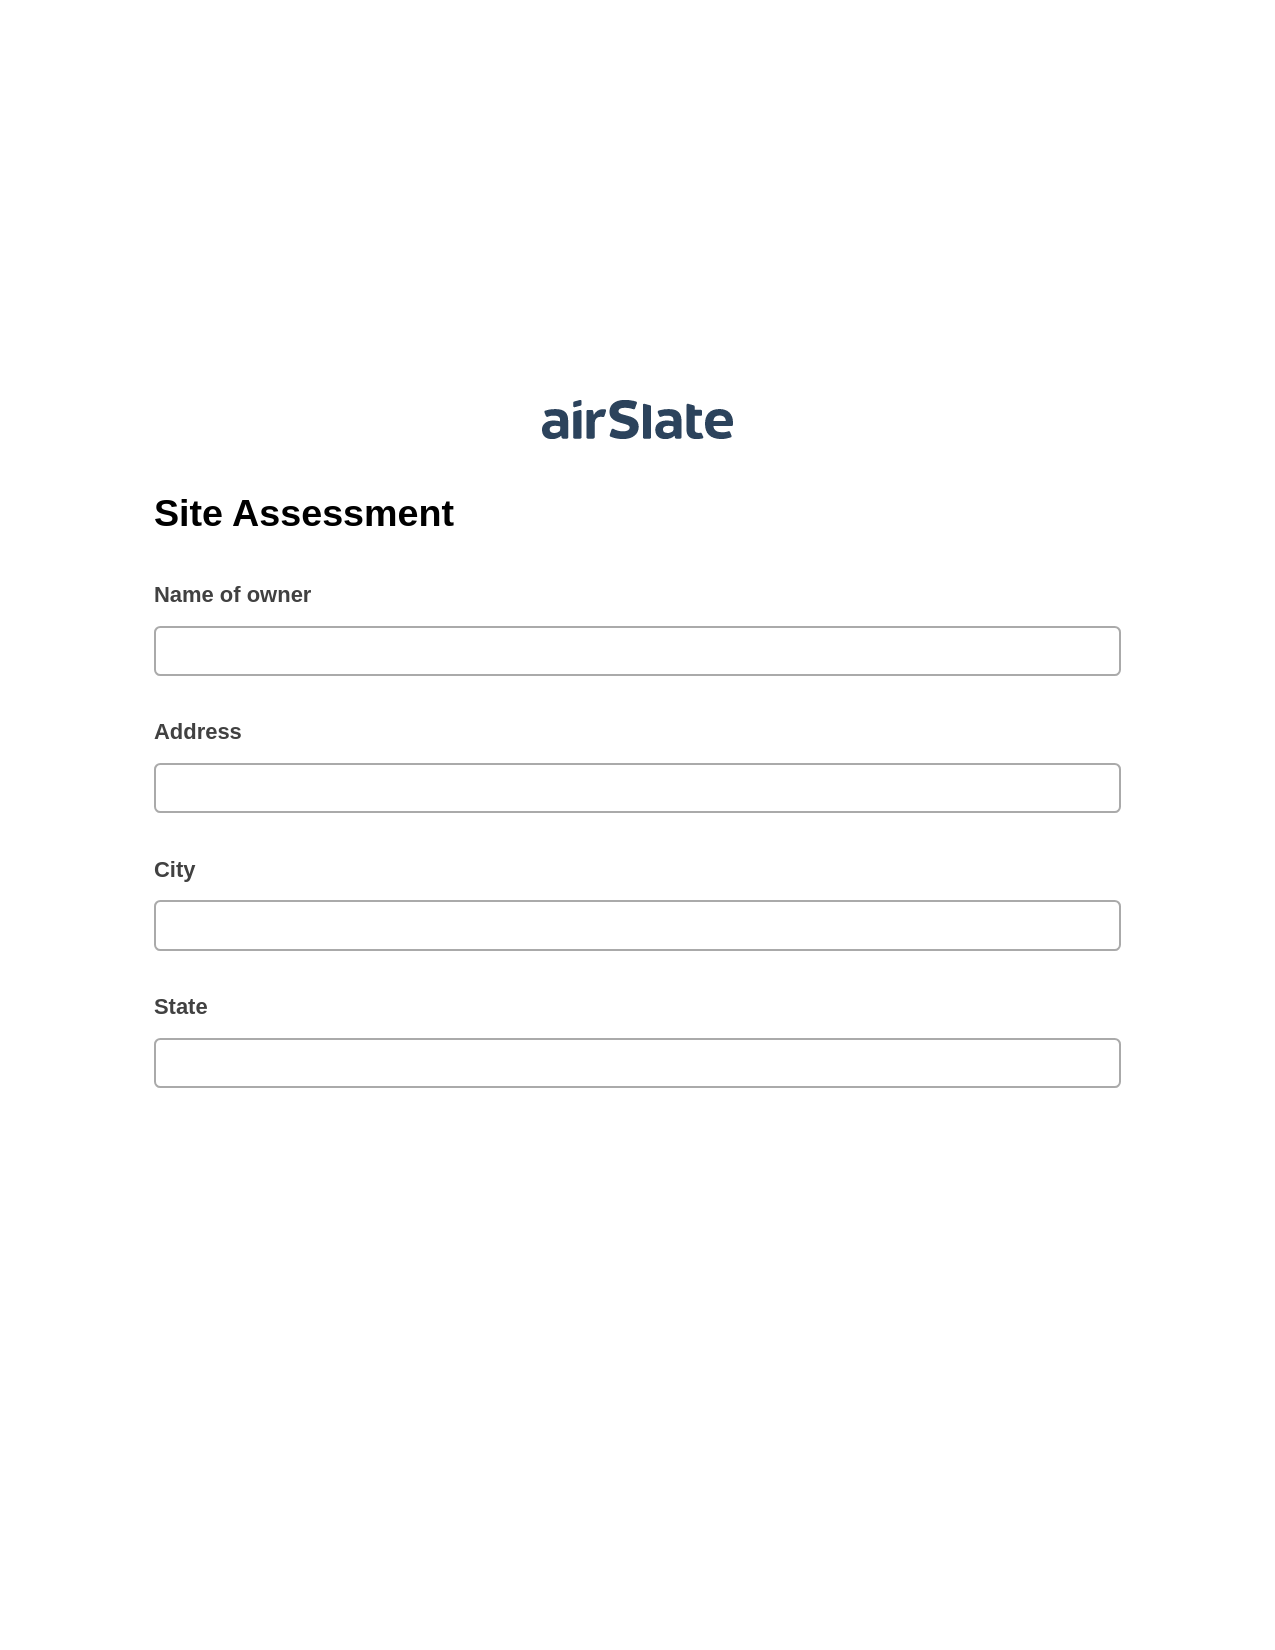 Site Assessment Pre-fill from NetSuite Records Bot, Add Tags to Slate Bot, Export to NetSuite Record Bot